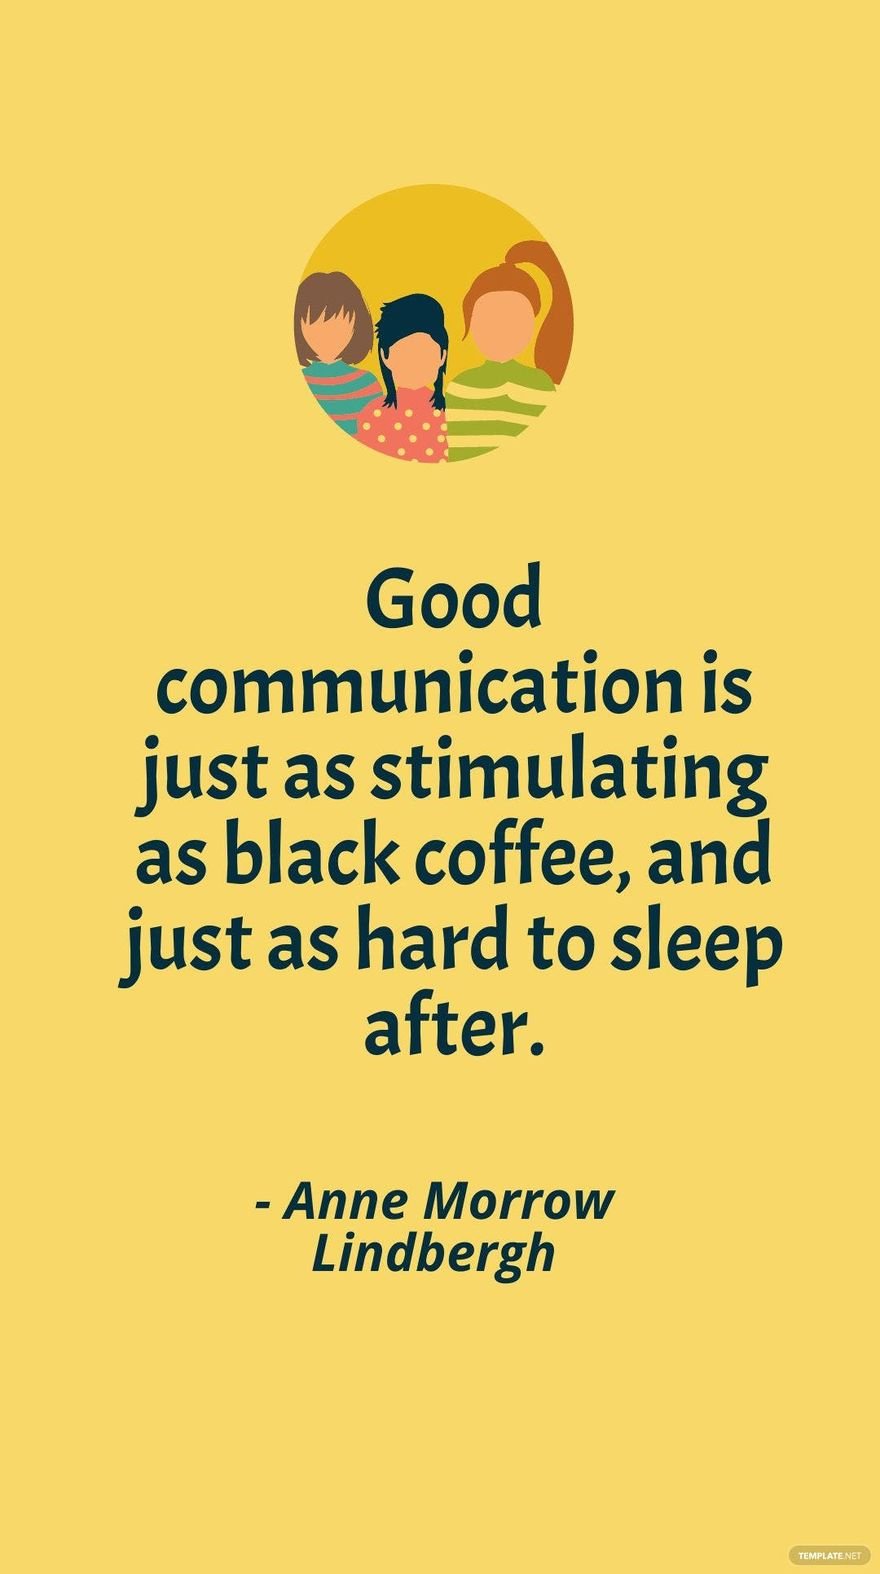 Free Anne Morrow Lindbergh - Good communication is just as stimulating as black coffee, and just as hard to sleep after.